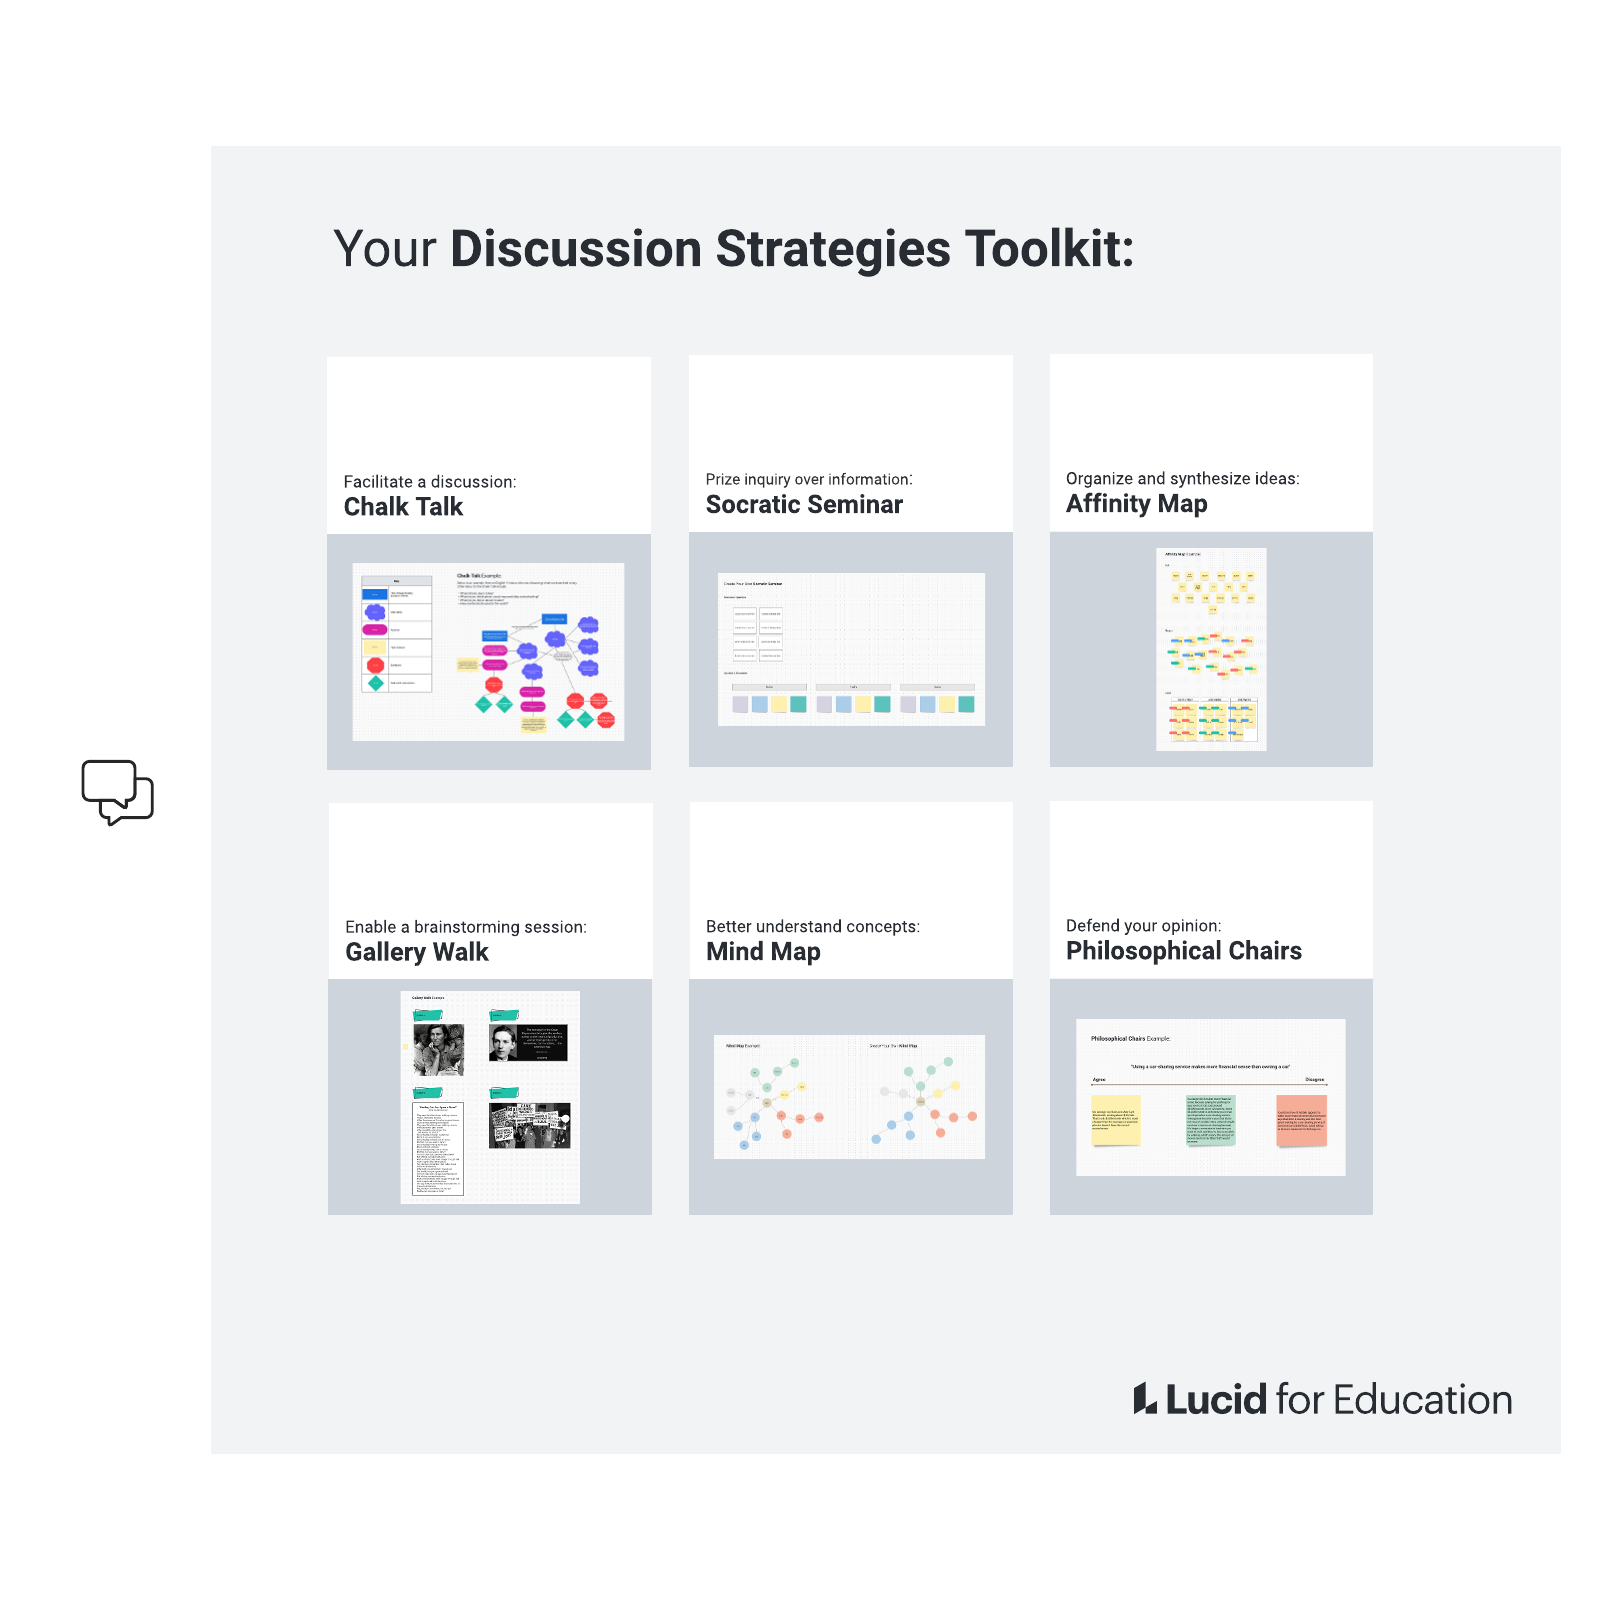 Discussion Strategies Toolkit example